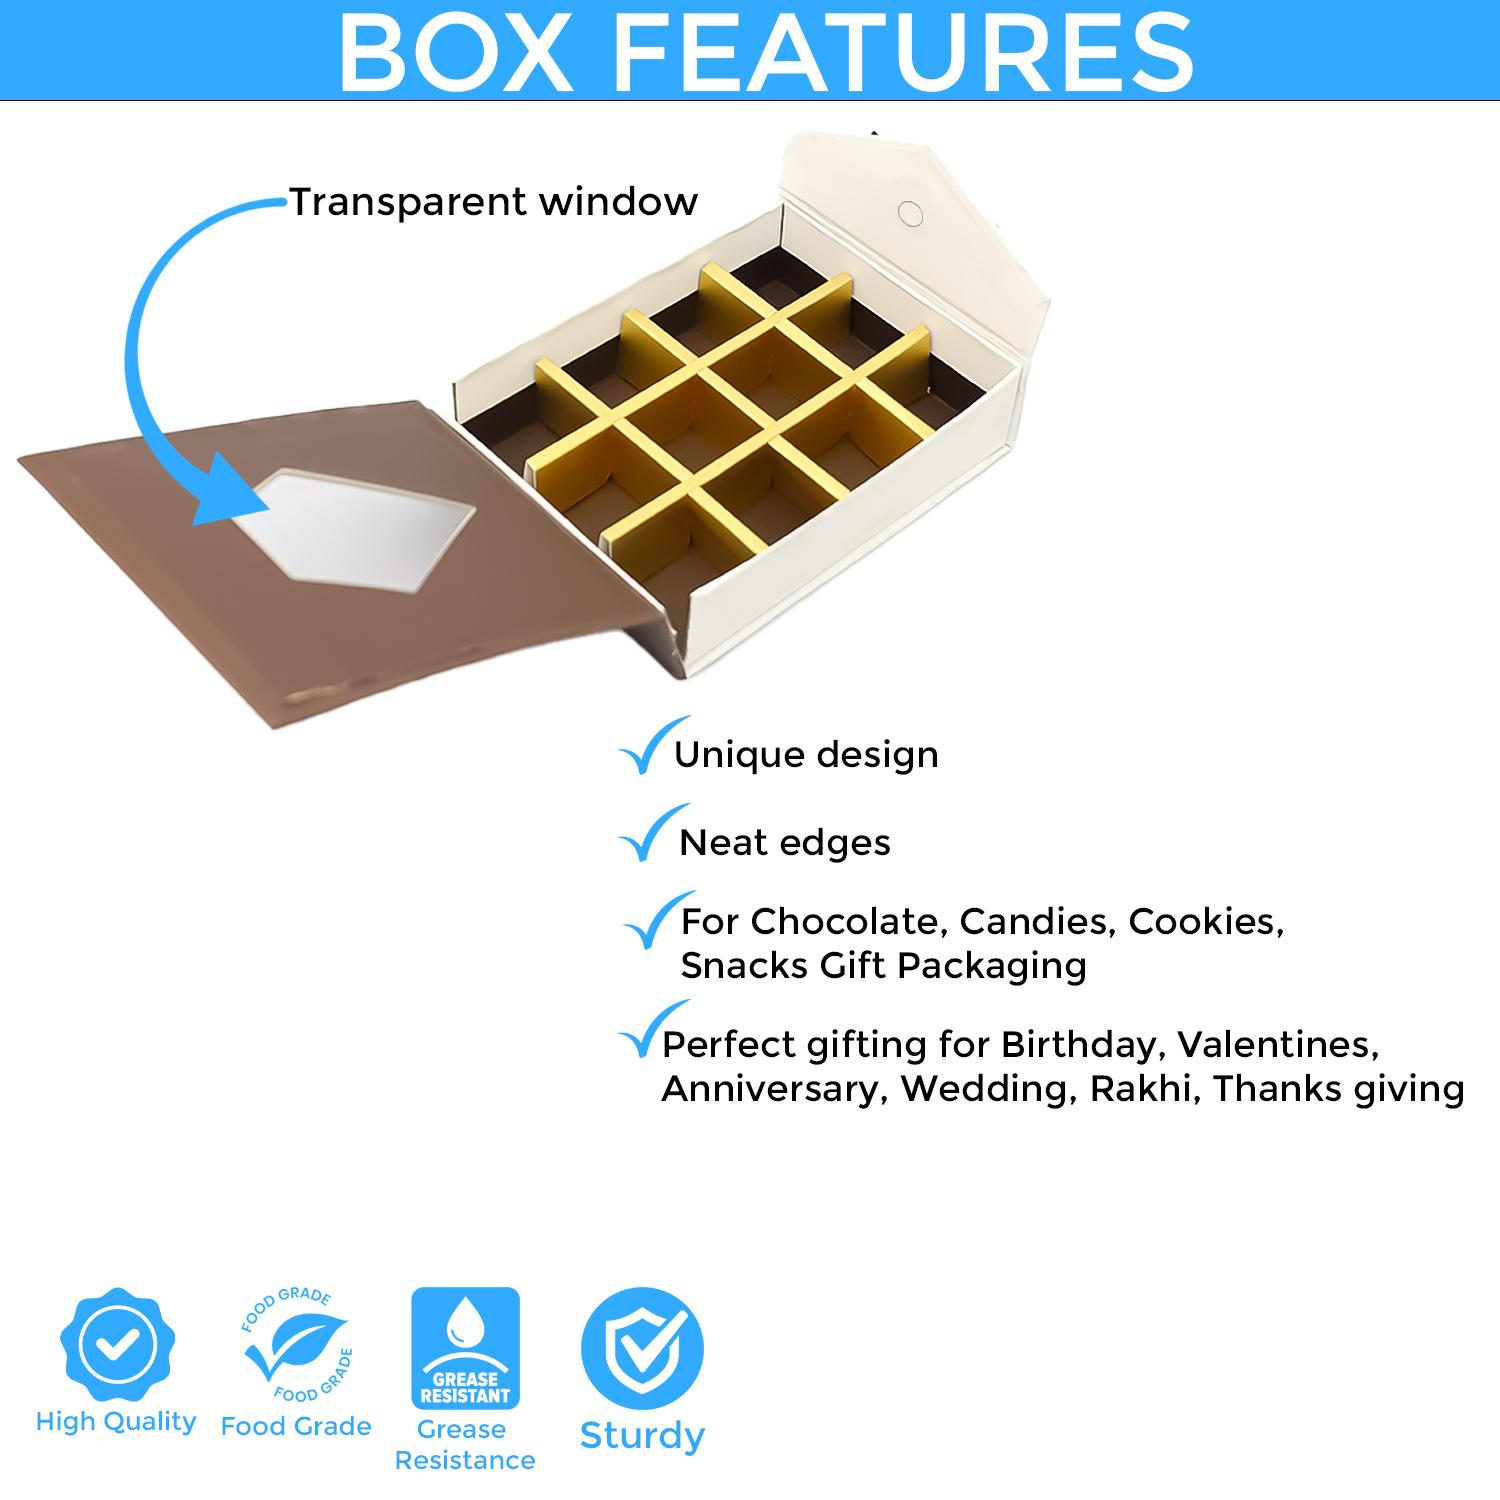 BROWN AND WHITE CHOCOLATE BOX 12 HOLE